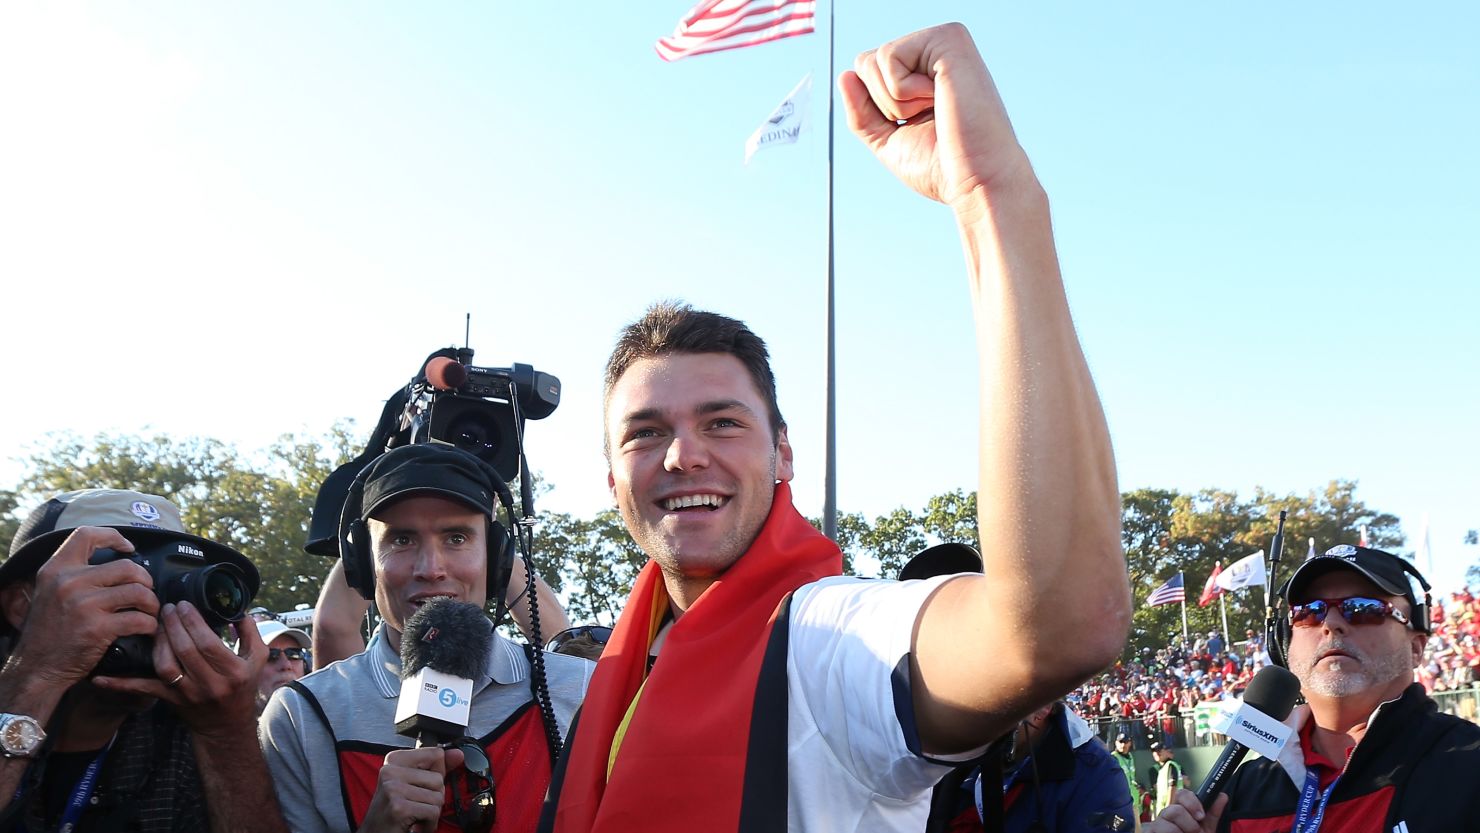 Martin Kaymer holed the putt which ensured Europe would retain the Ryder Cup.